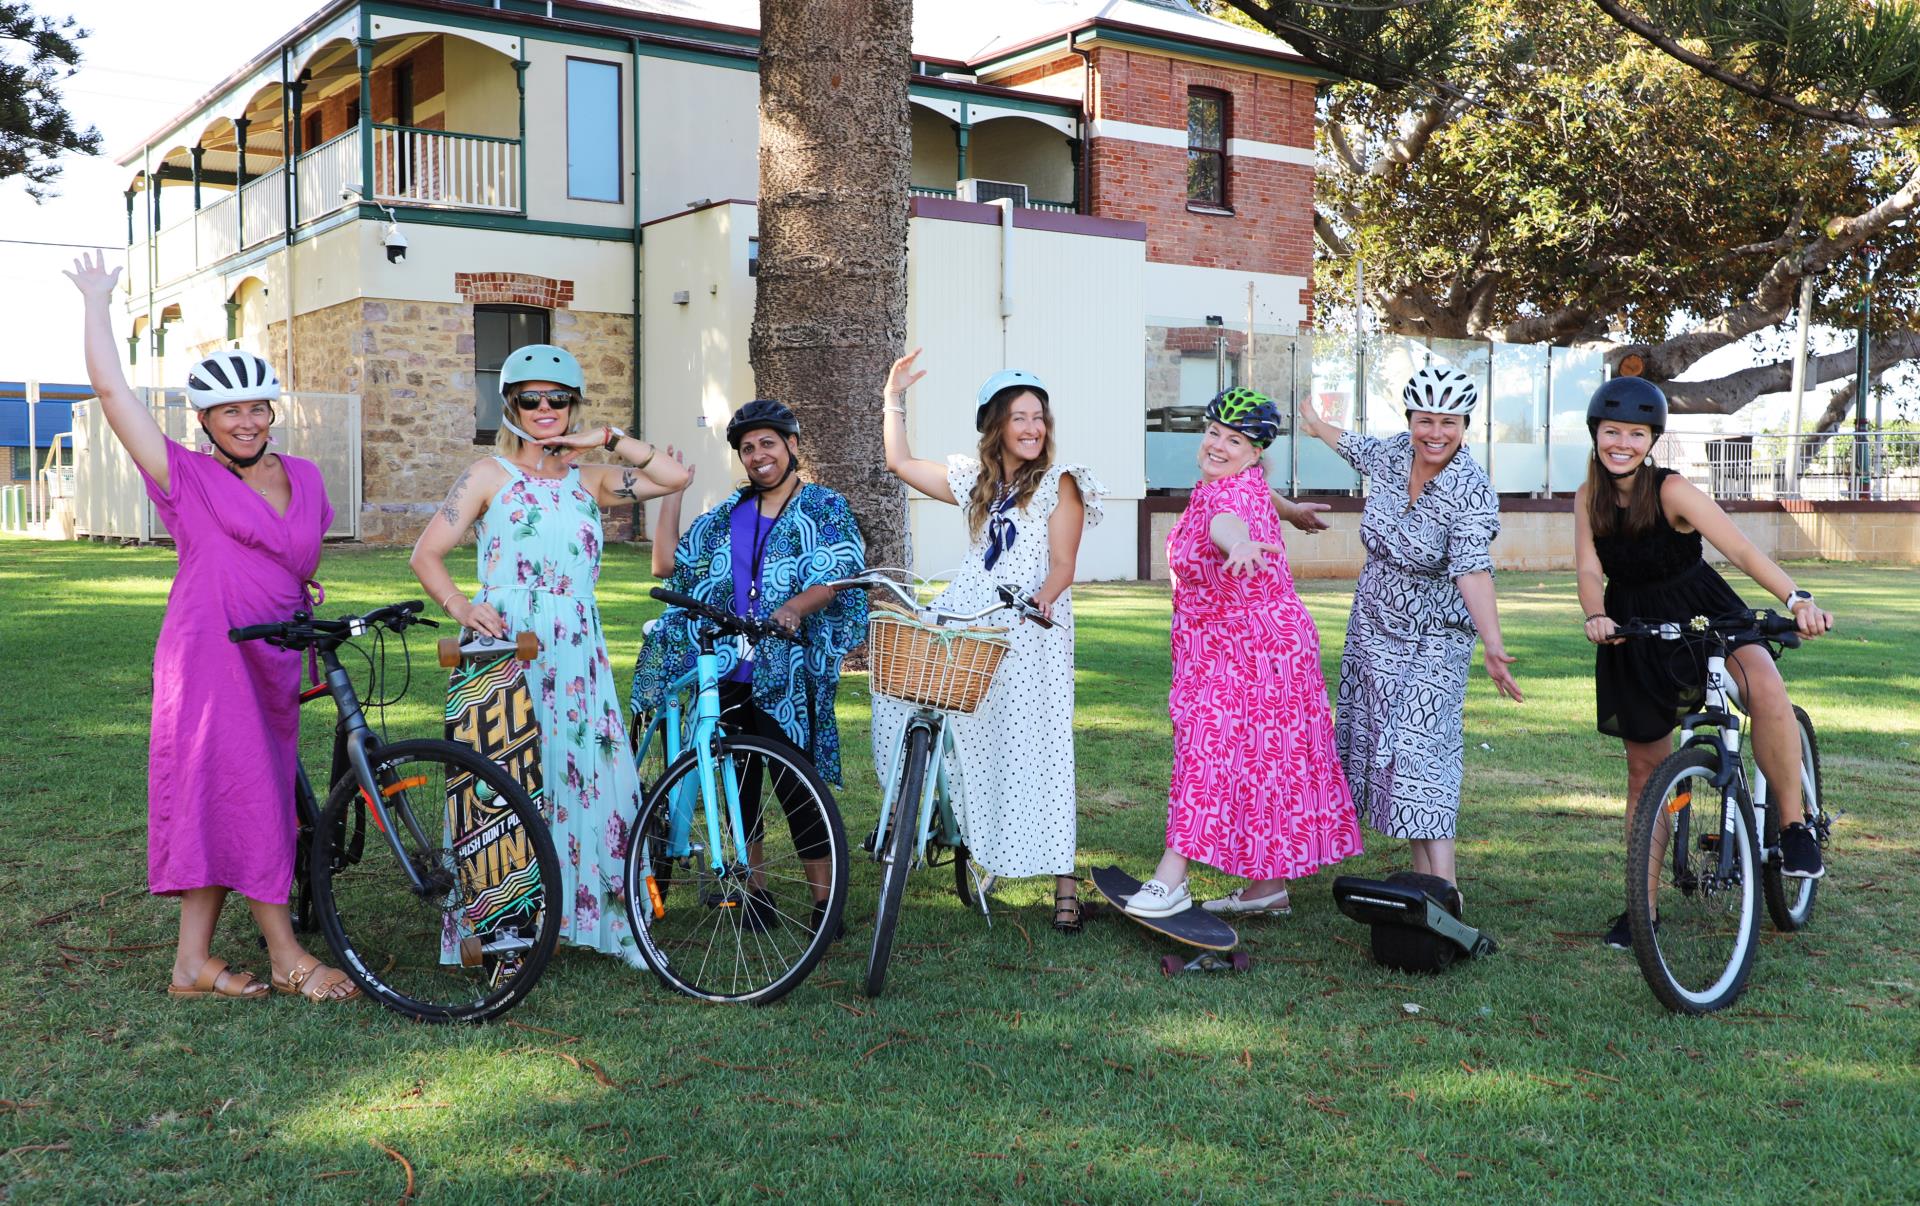 Women on Wheels Geraldton event to celebrate active transport and community